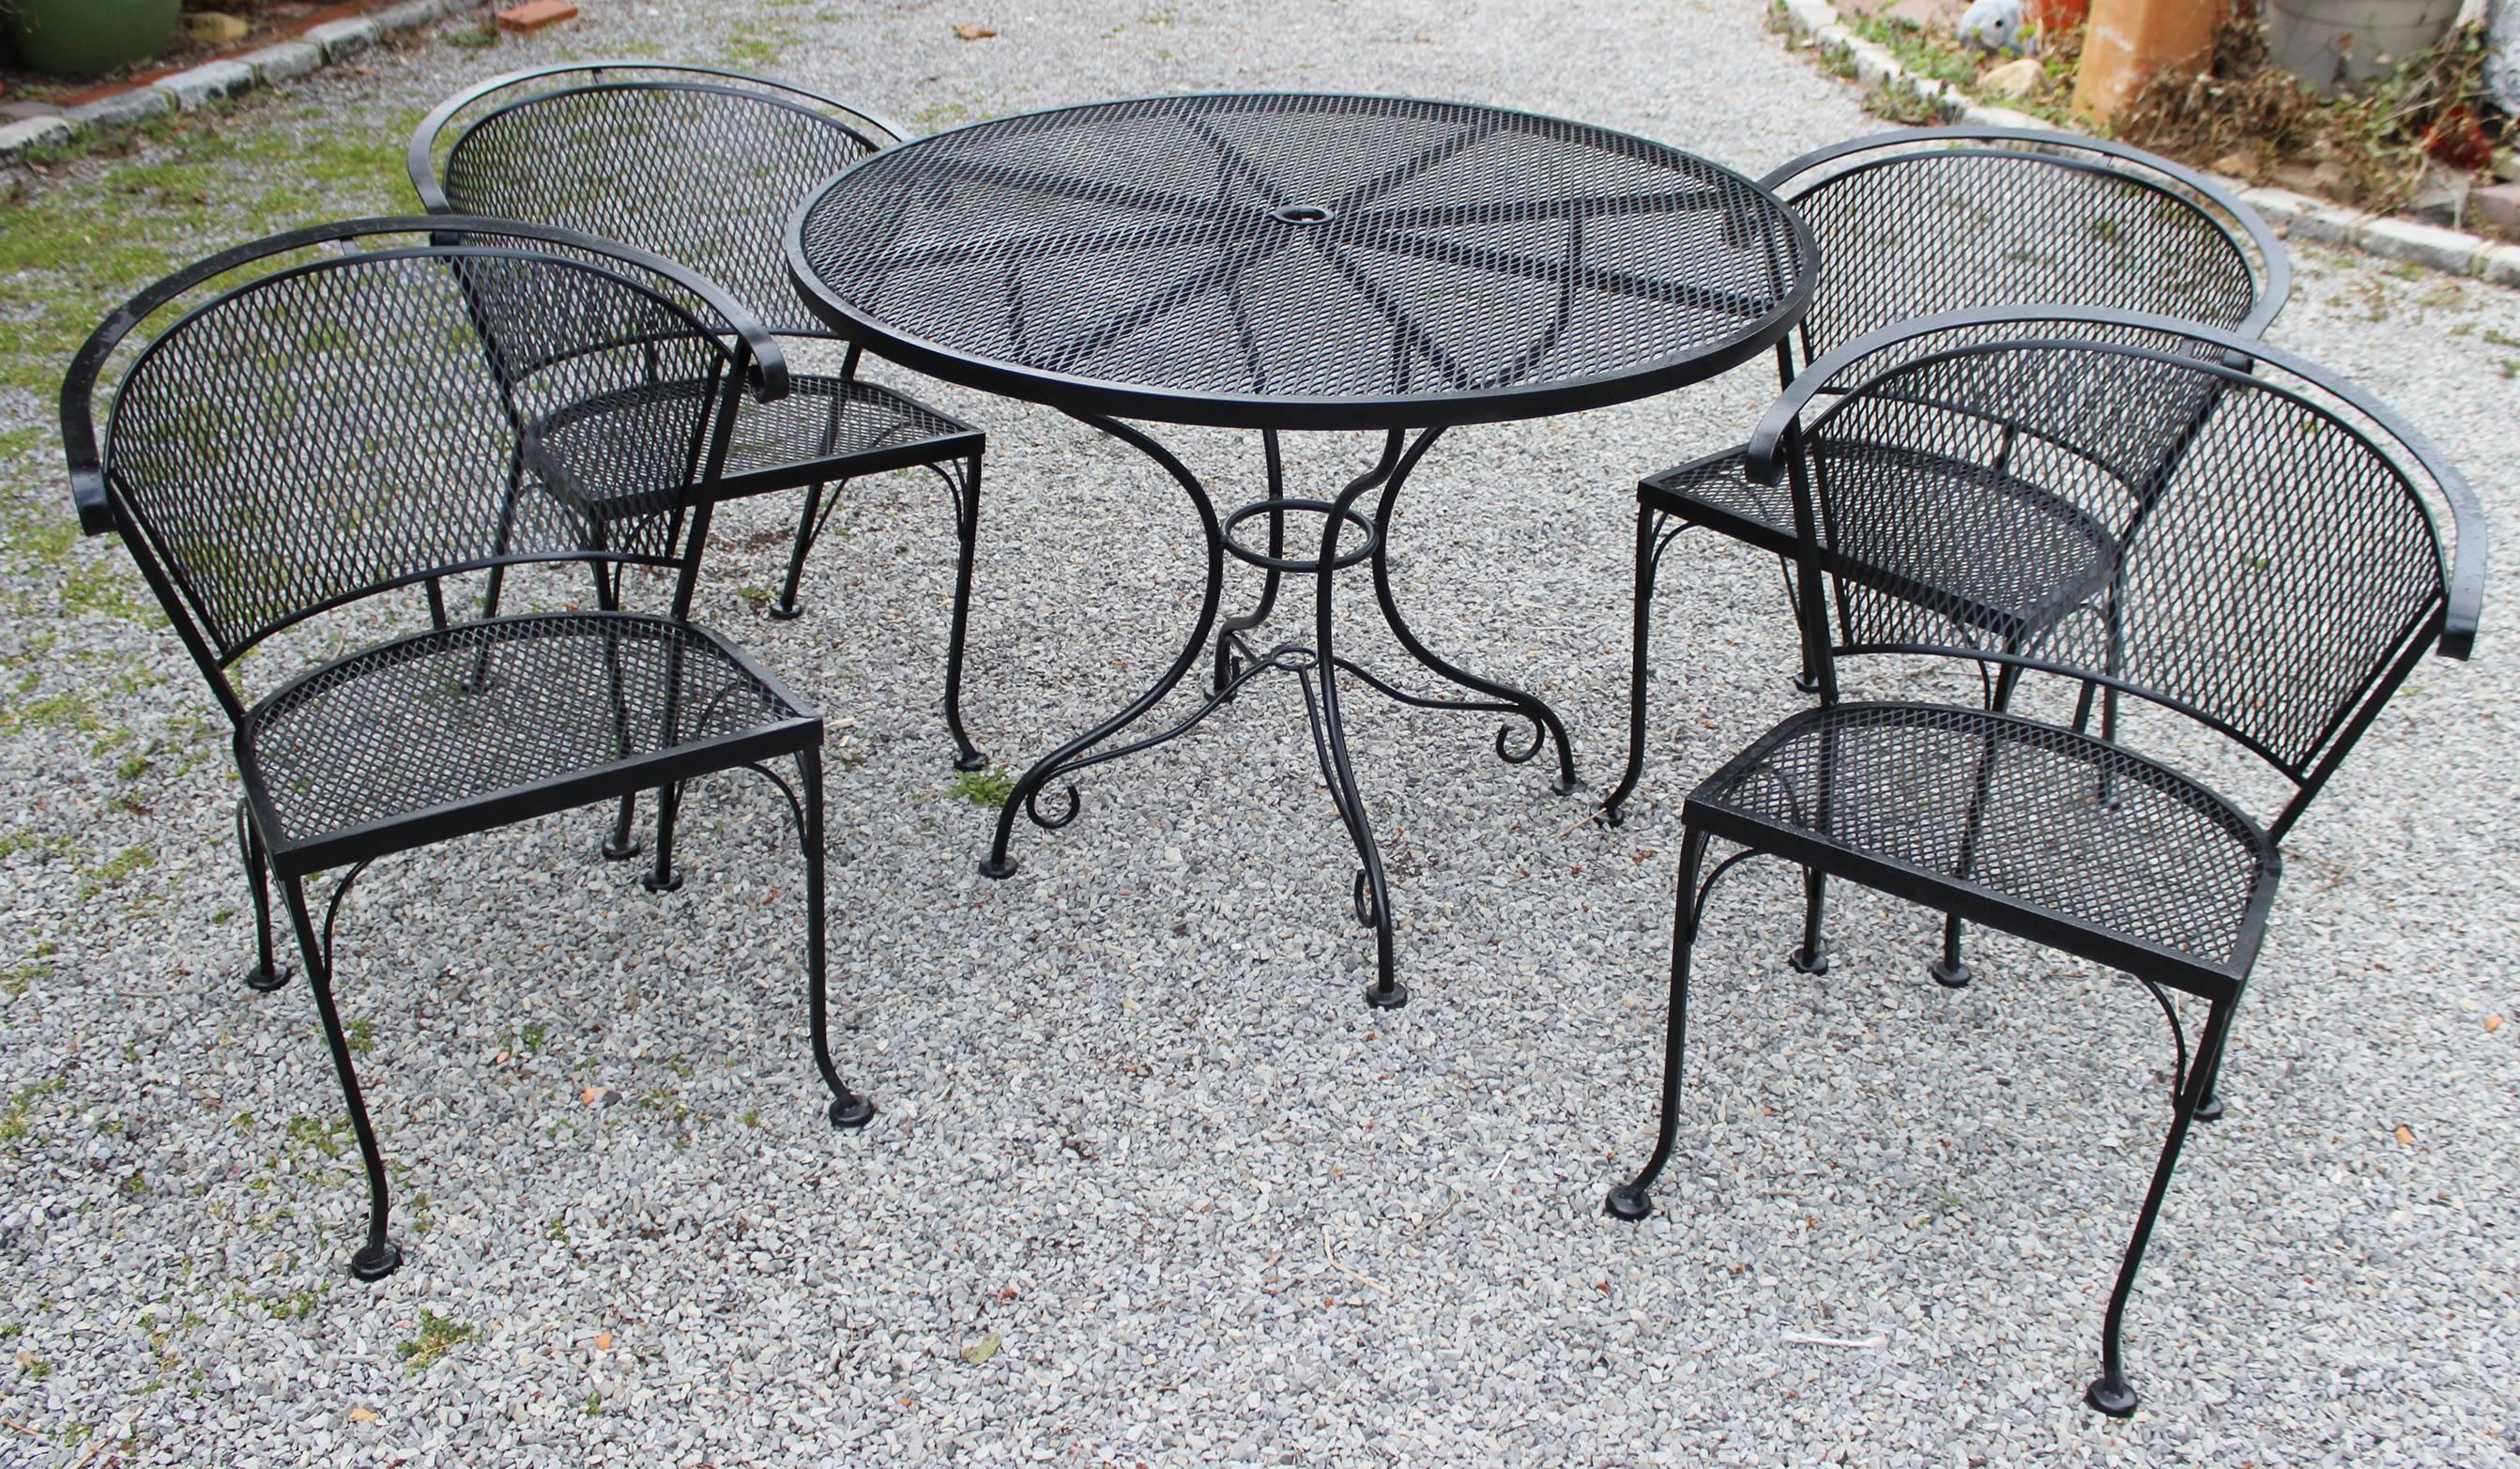 A round iron garden table and four chairs by Salterini.

Chair dimensions:
29.5 inches H x 24.25 W x 23.25 D (seat height 16 inches).